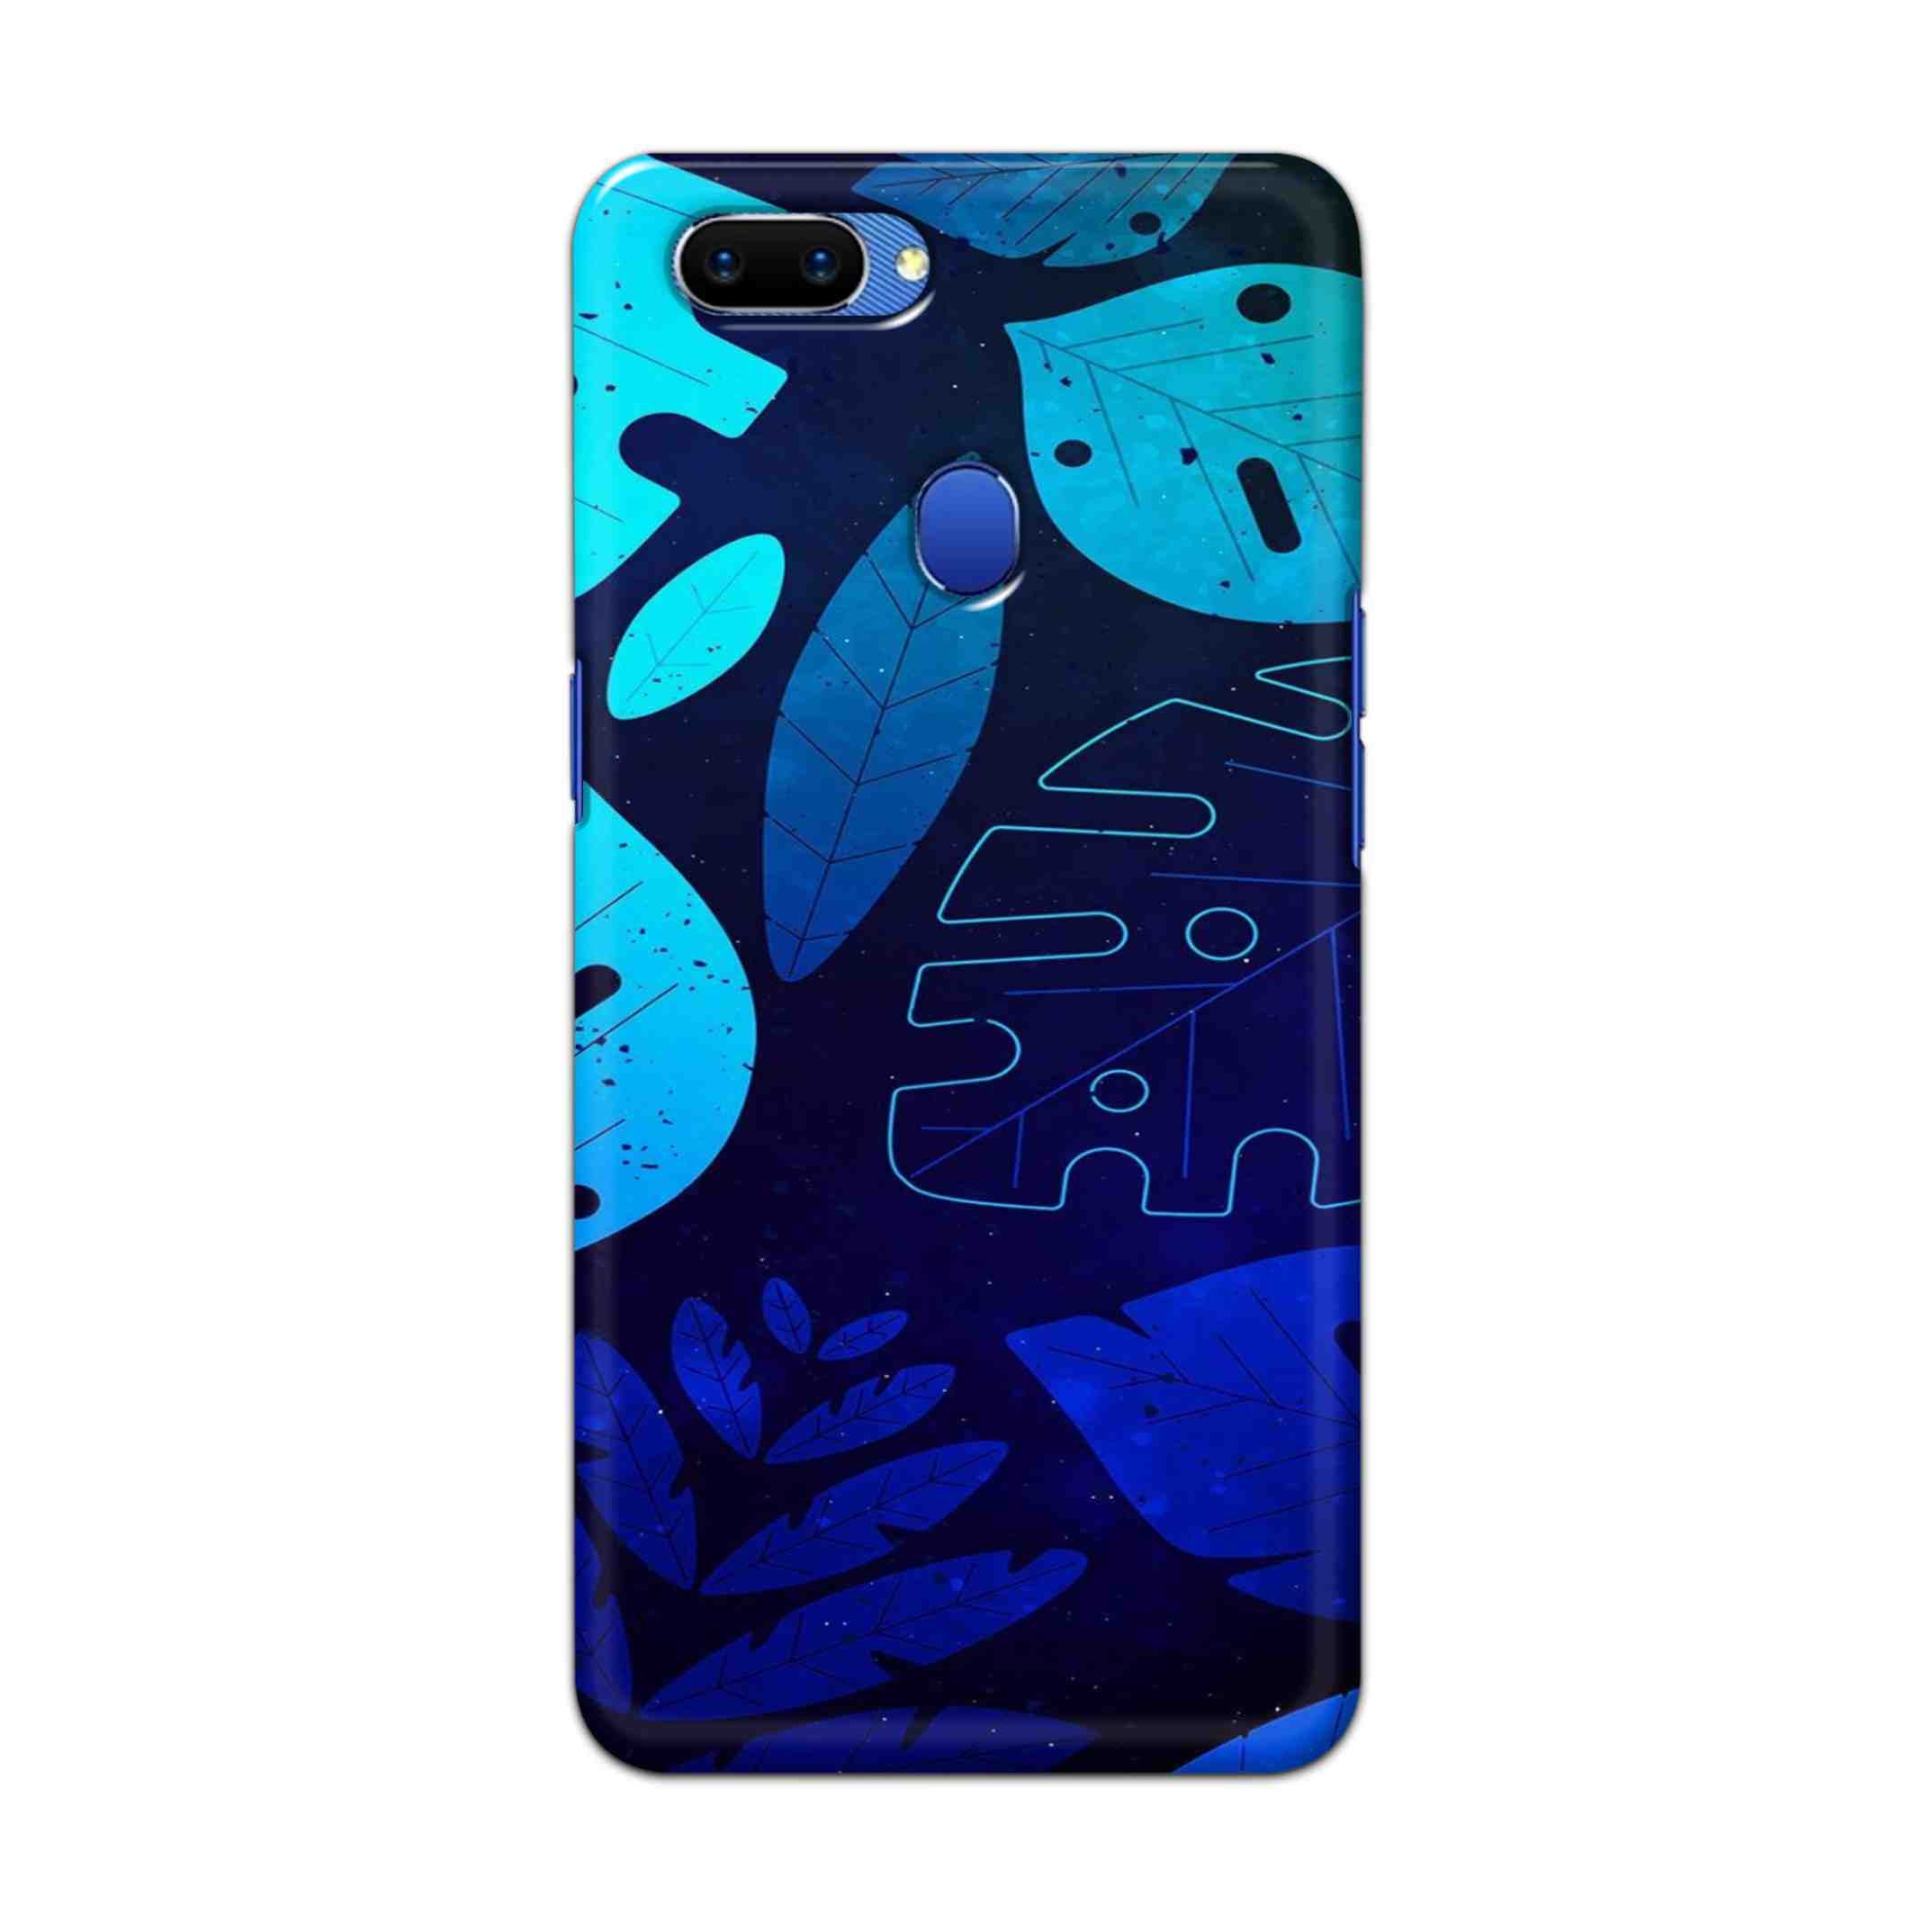 Buy Neon Leaf Hard Back Mobile Phone Case Cover For Oppo A5 Online